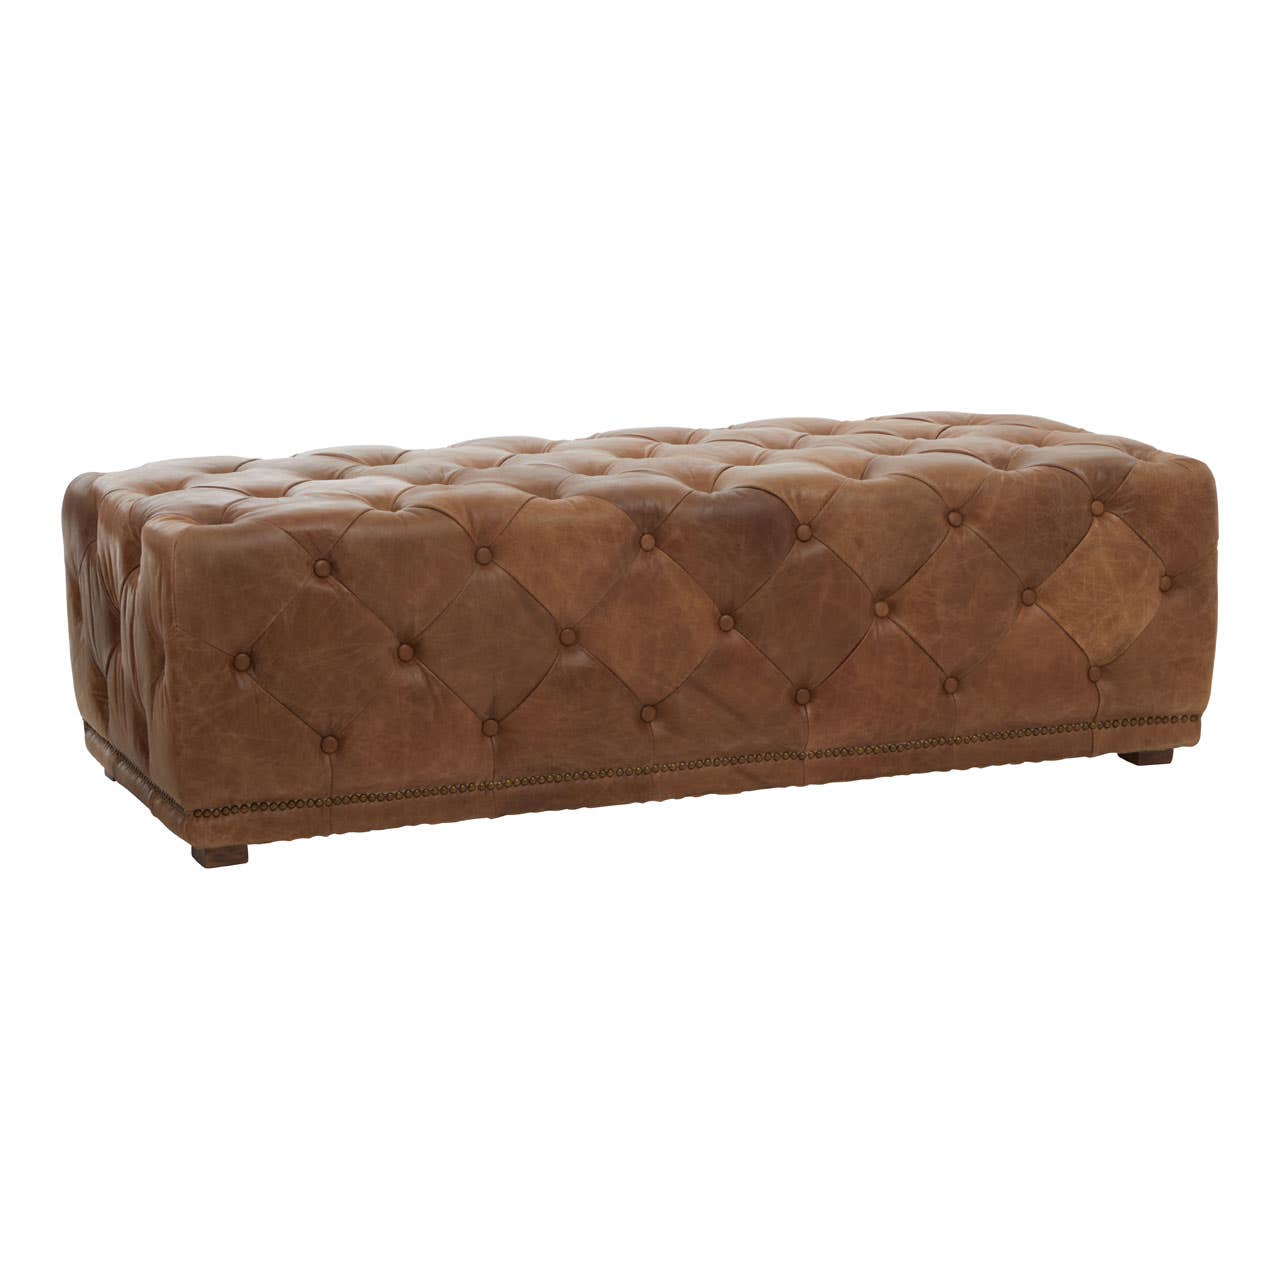 Hoxton Tufted Leather Rectangle Ottoman